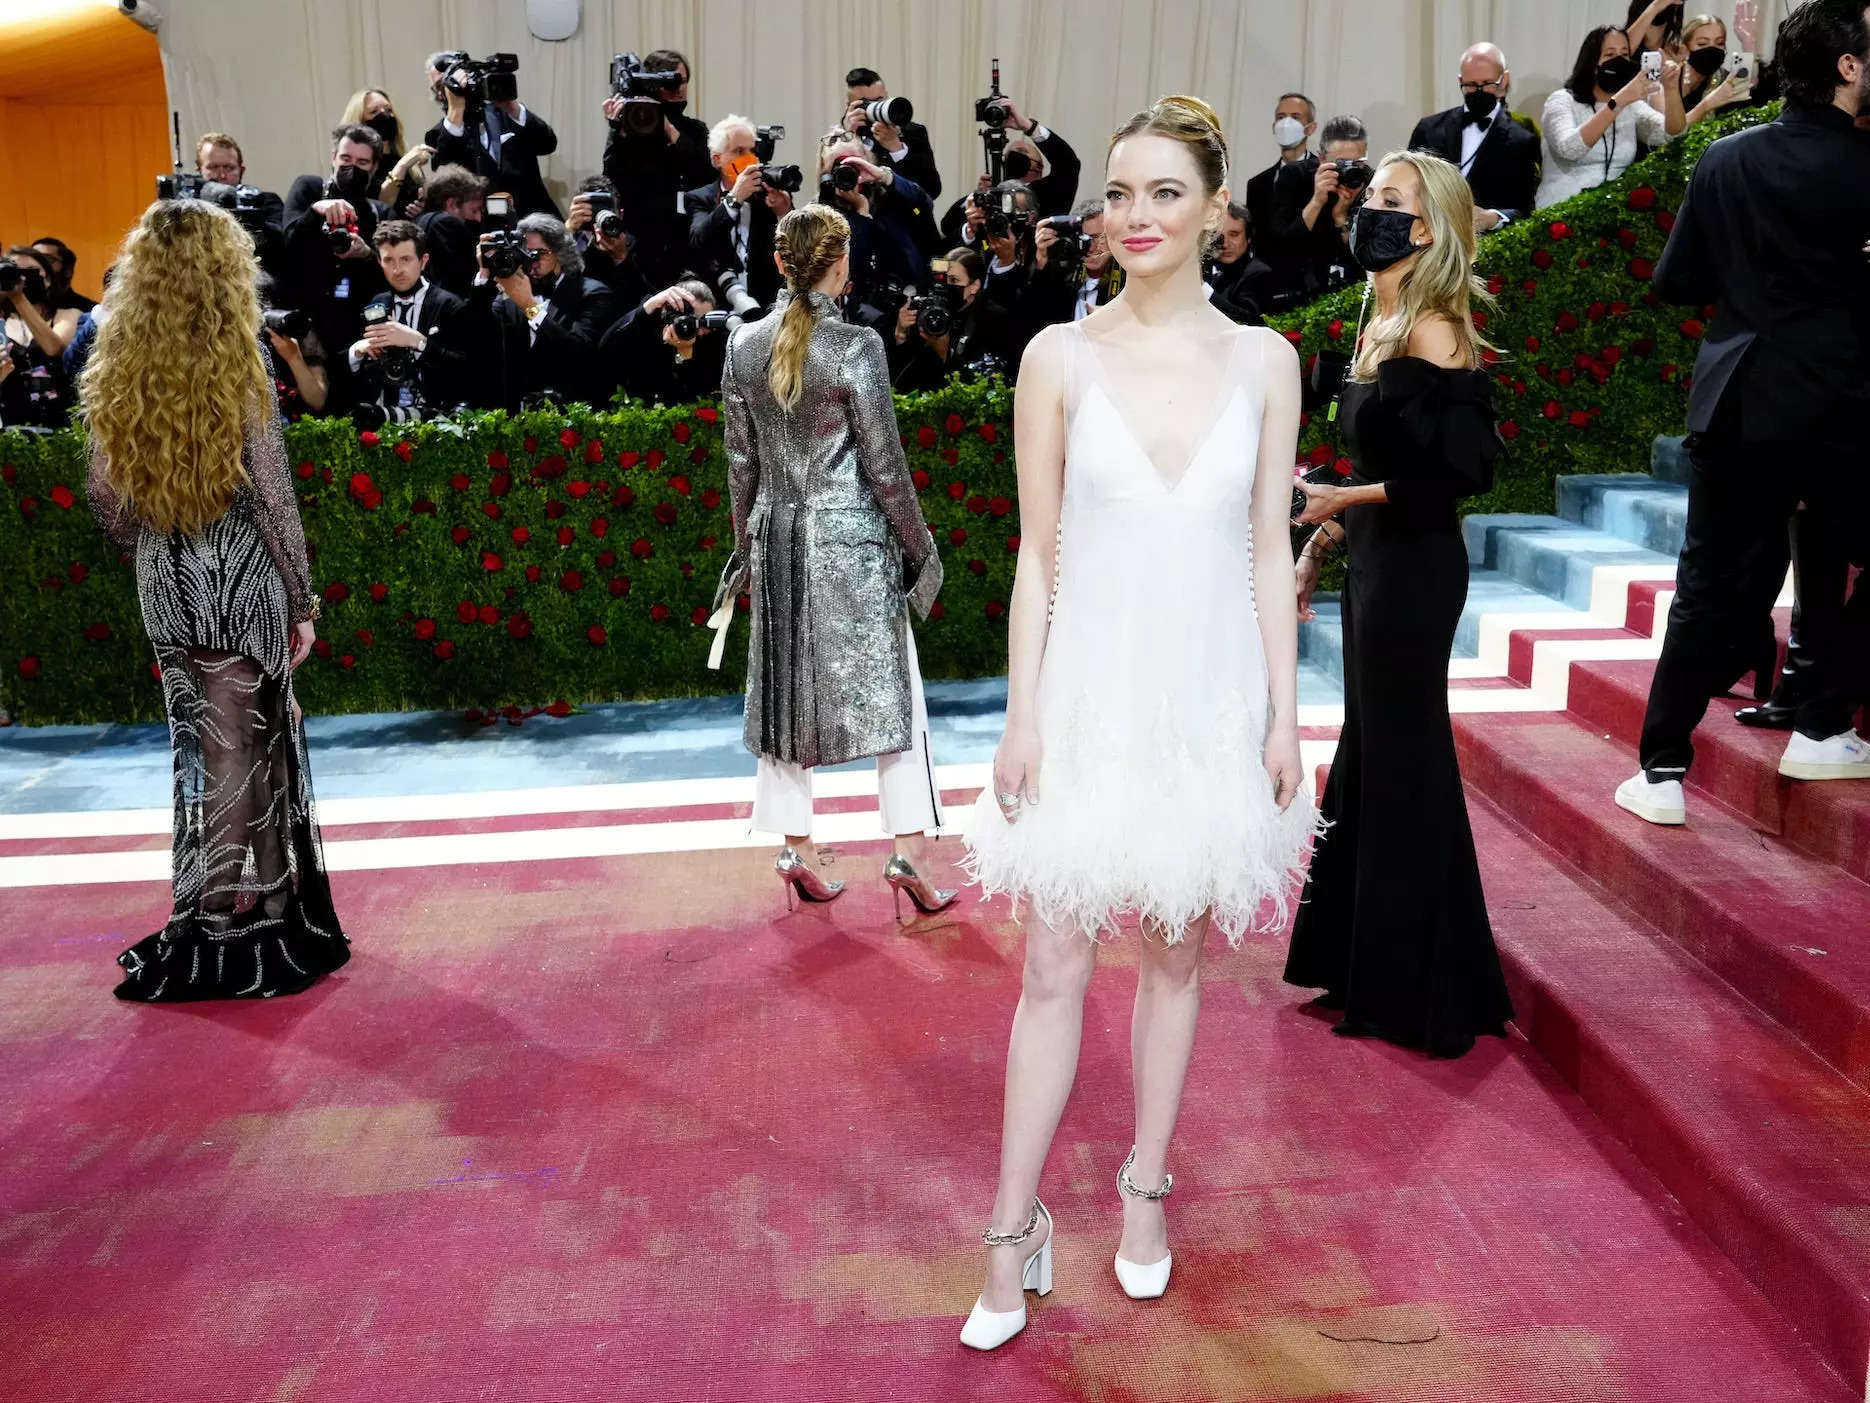 Emma Stone rewore one of her wedding dresses to the Met Gala red carpet ...